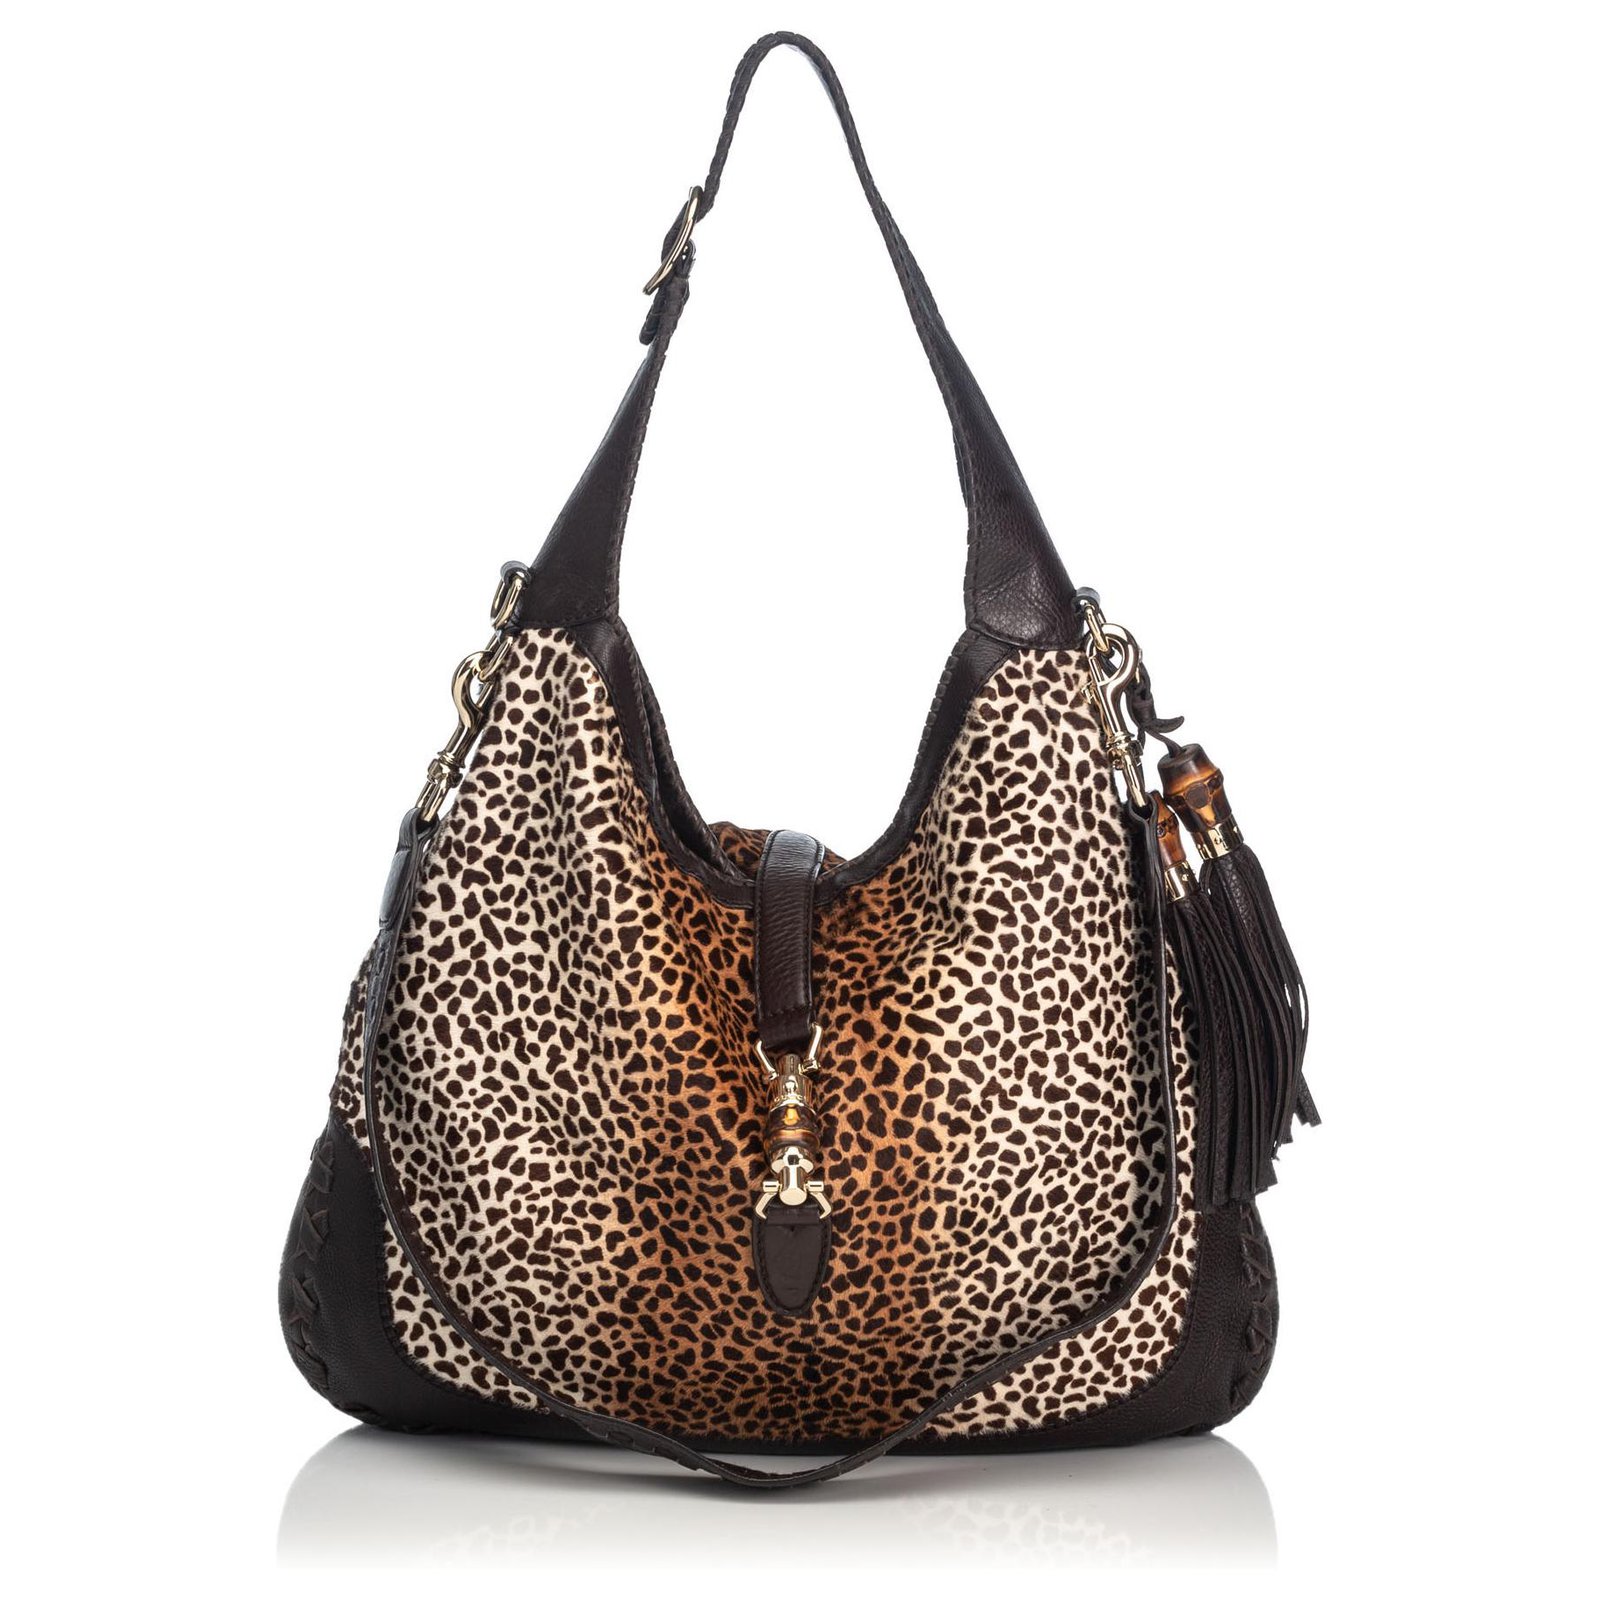 Gucci Black/Brown Leopard Print Pony Hair and Leather New Jackie